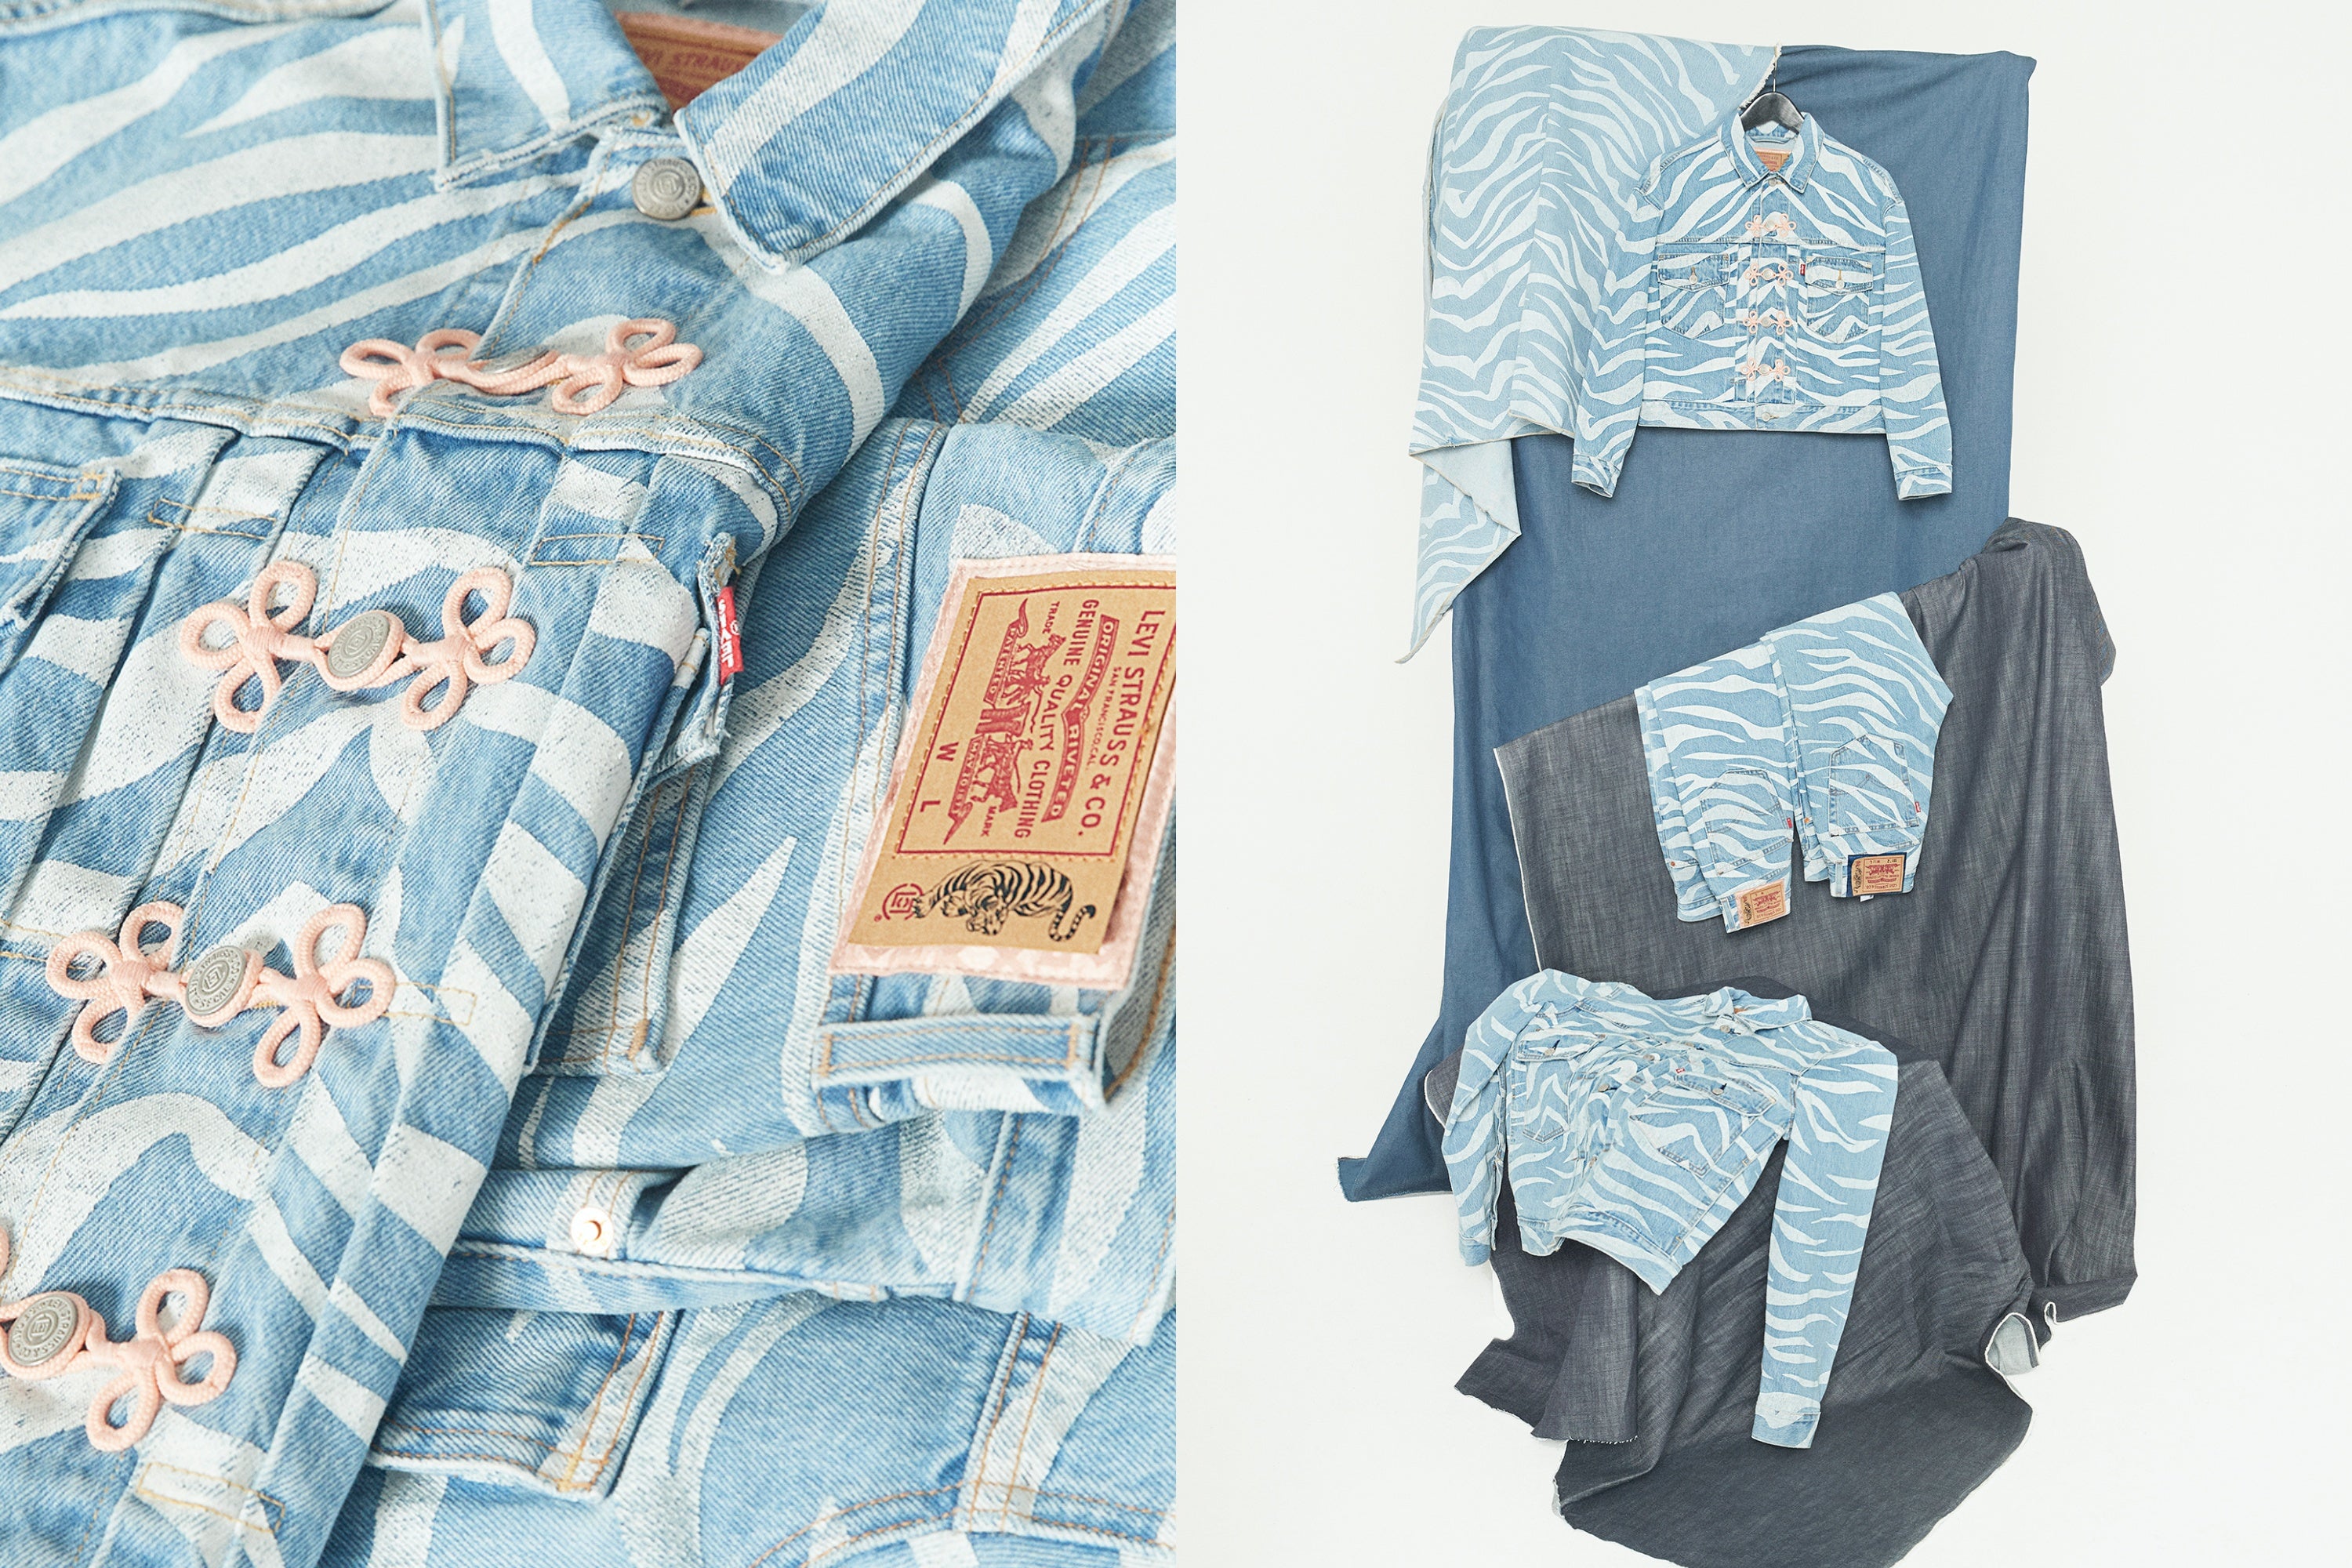 CLOT and Levi’s® present denim collection celebrating the Year of the Tiger